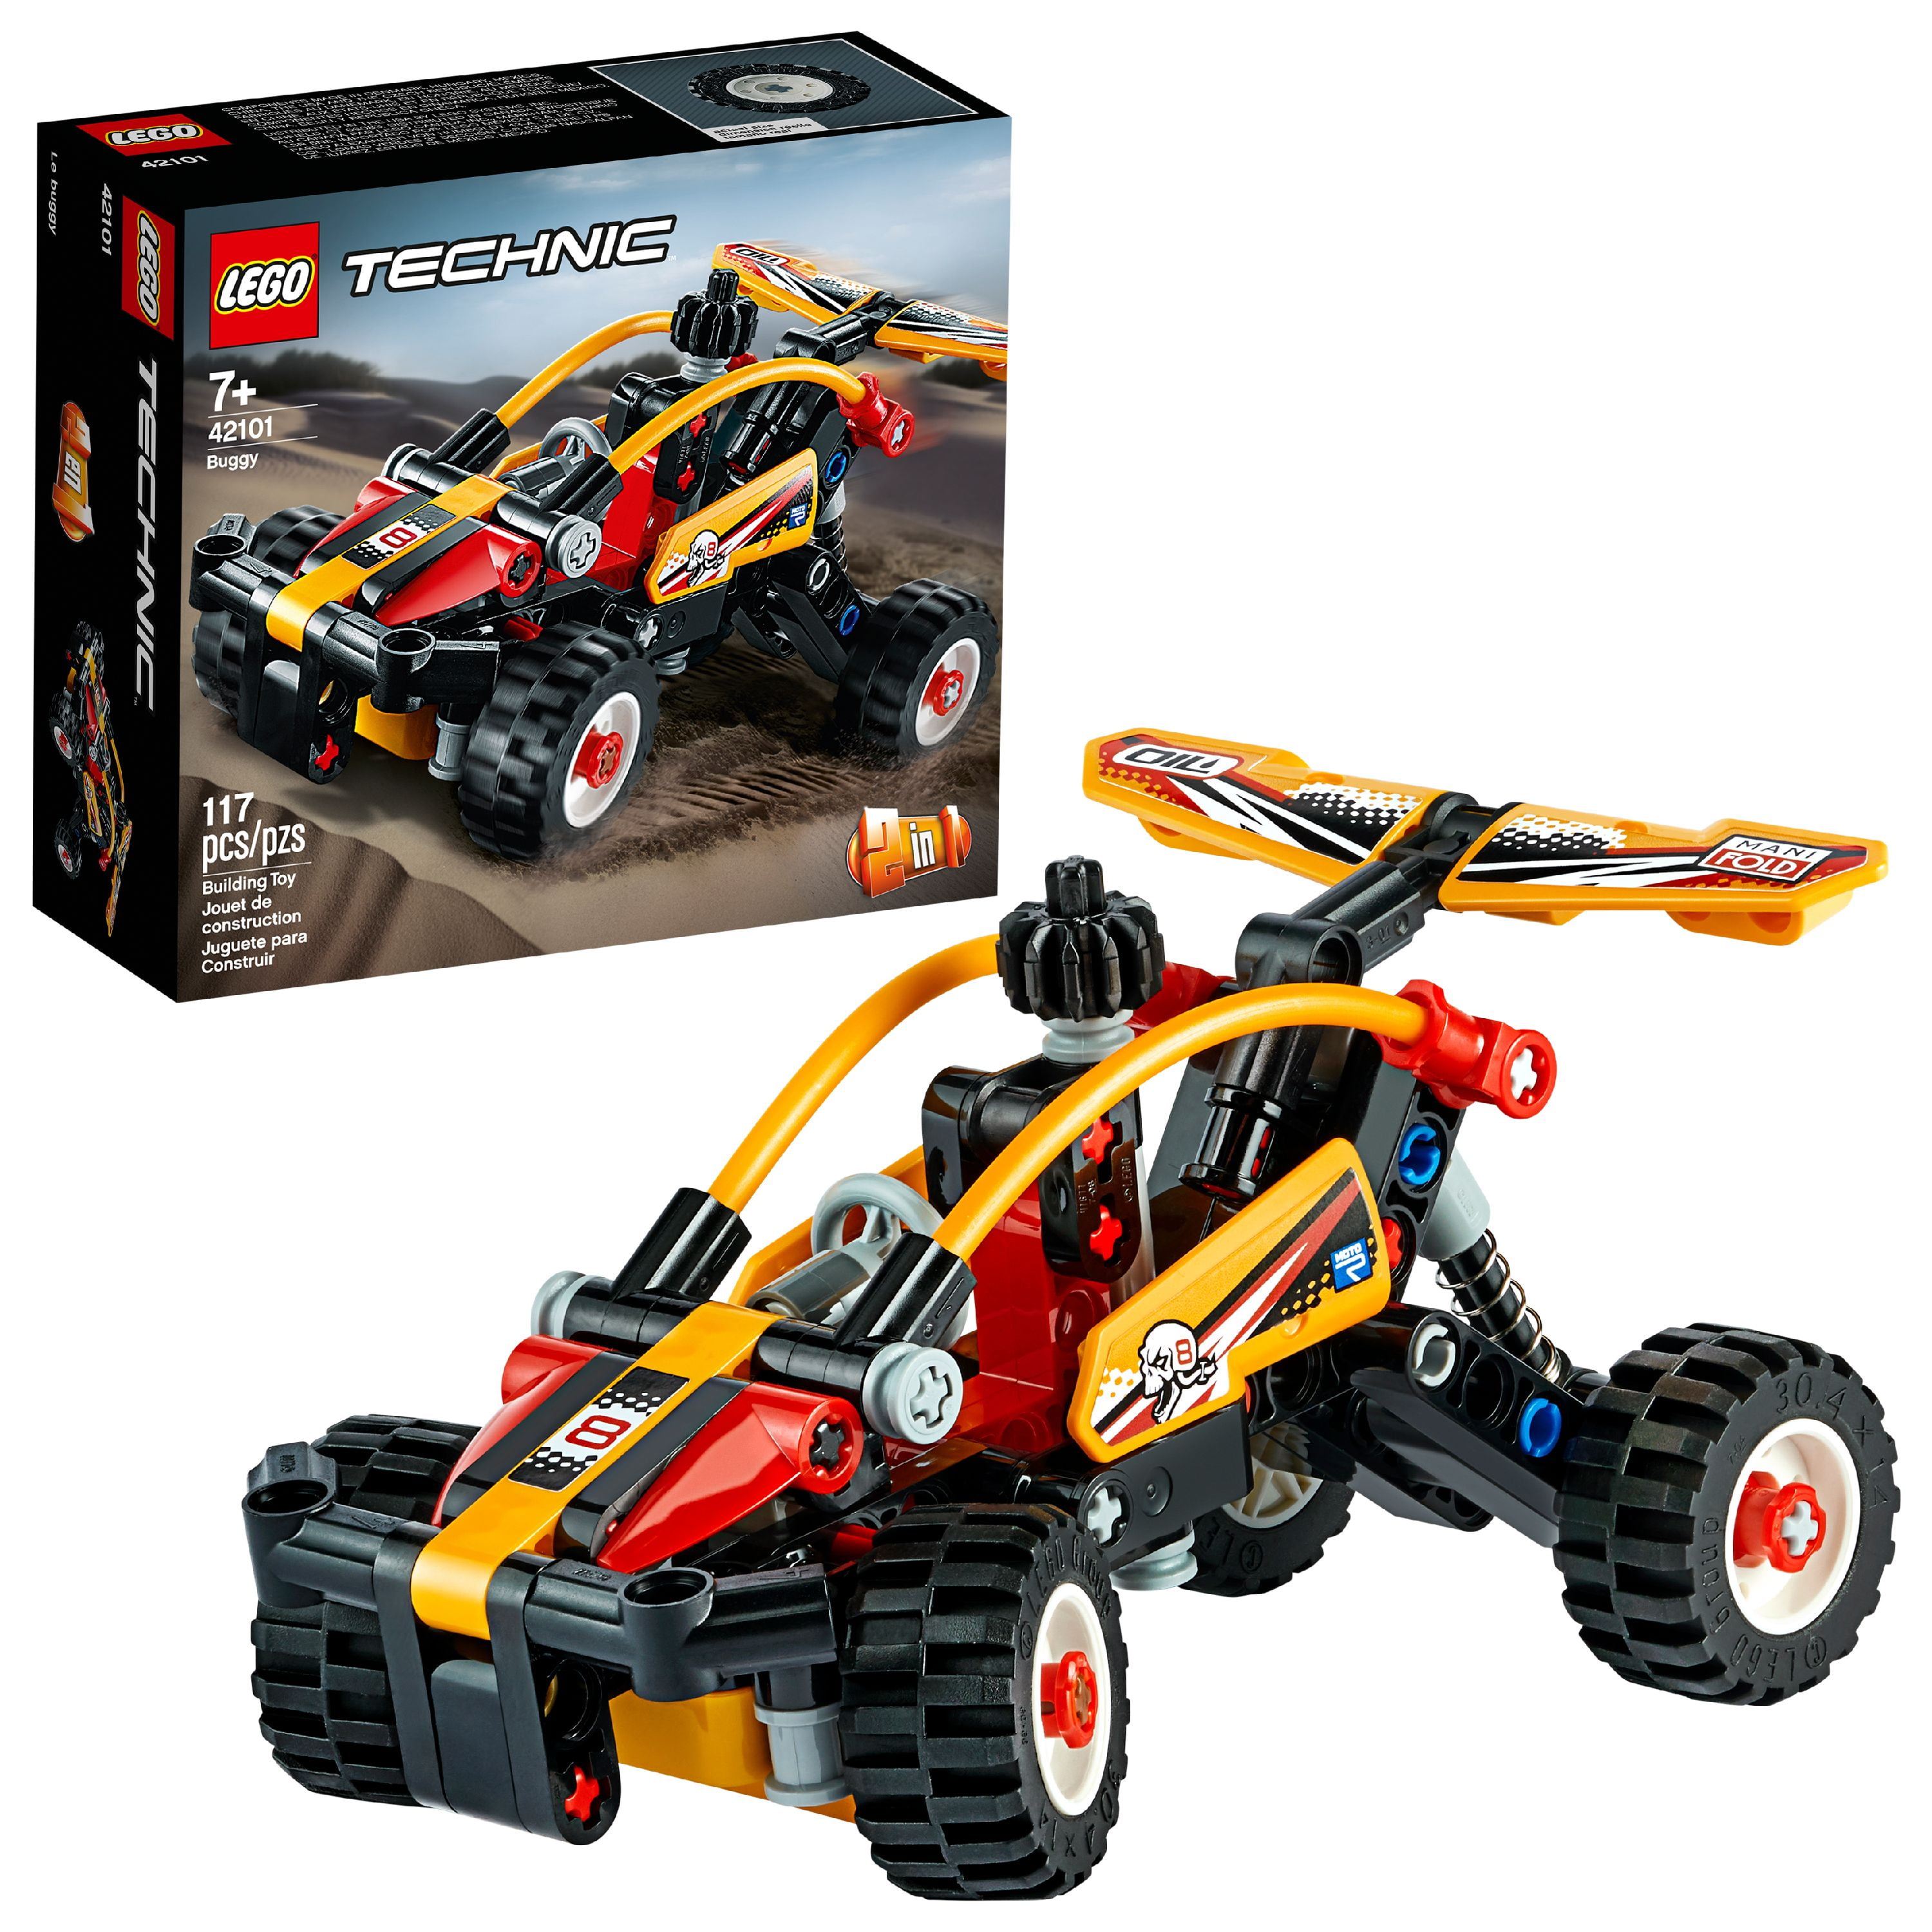 LEGO TECHNIC BUILDING INSTRUCTIONS COLLECTION PDF 2xDVD-R FREE SHIPPING